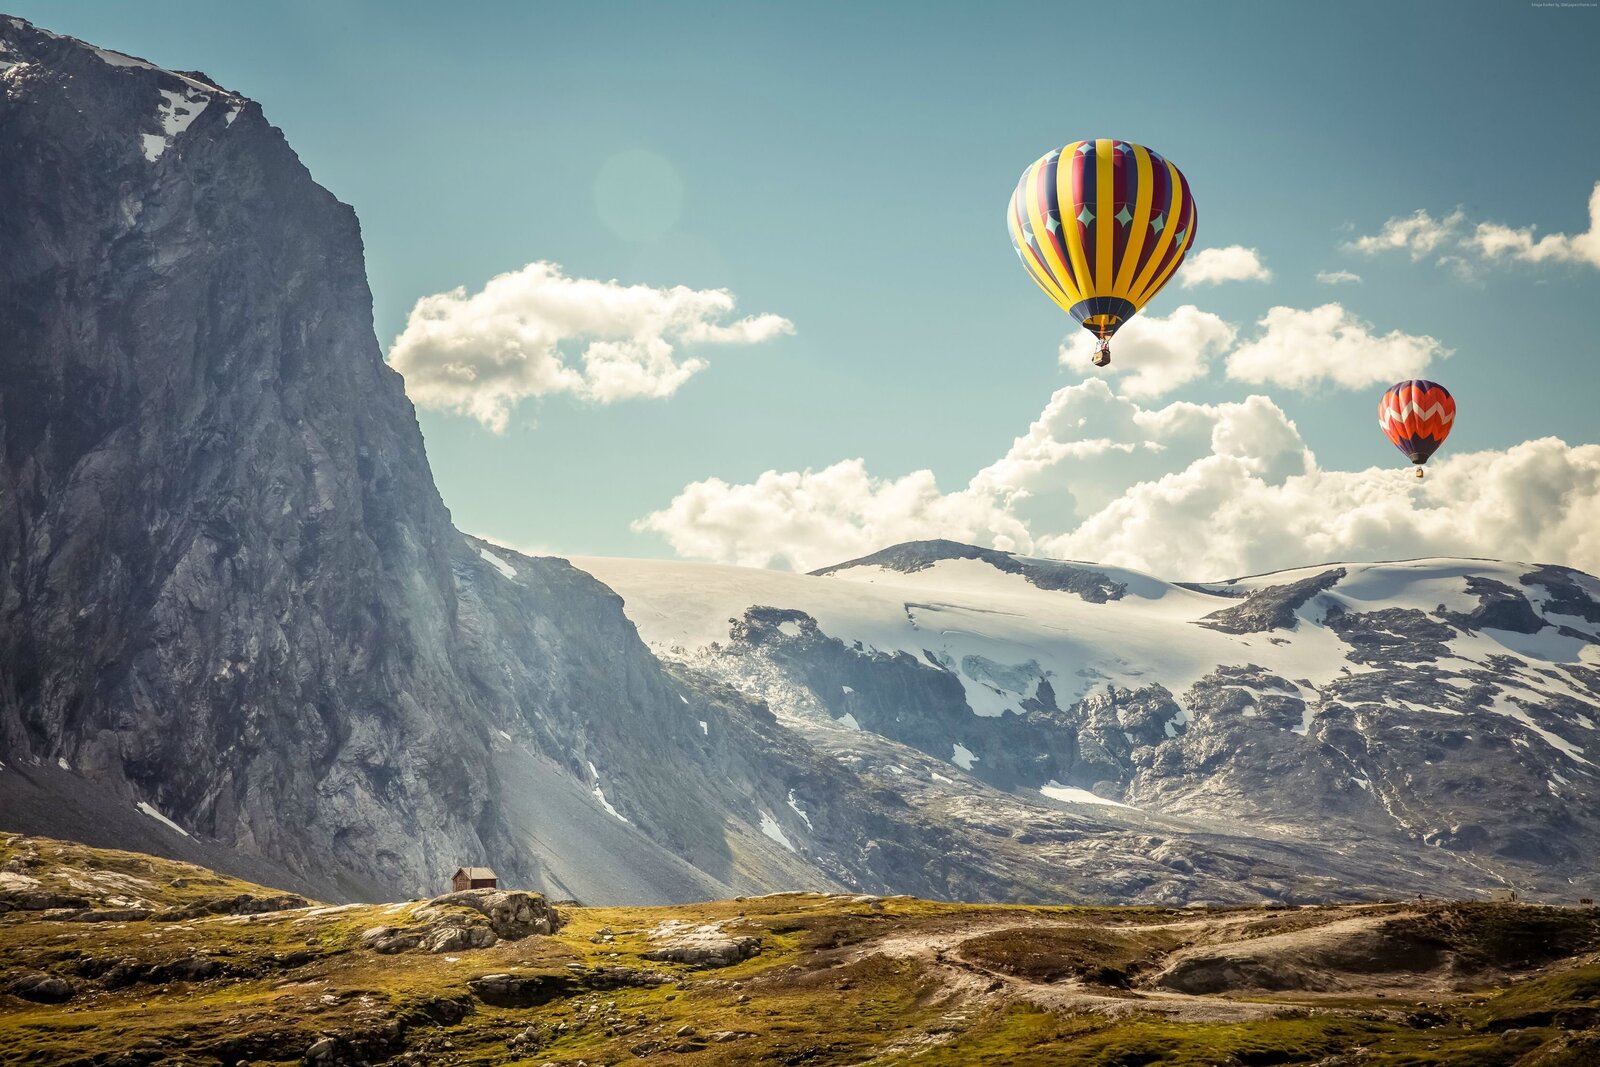 balloons-in-the-mountains-wallpaper.jpg